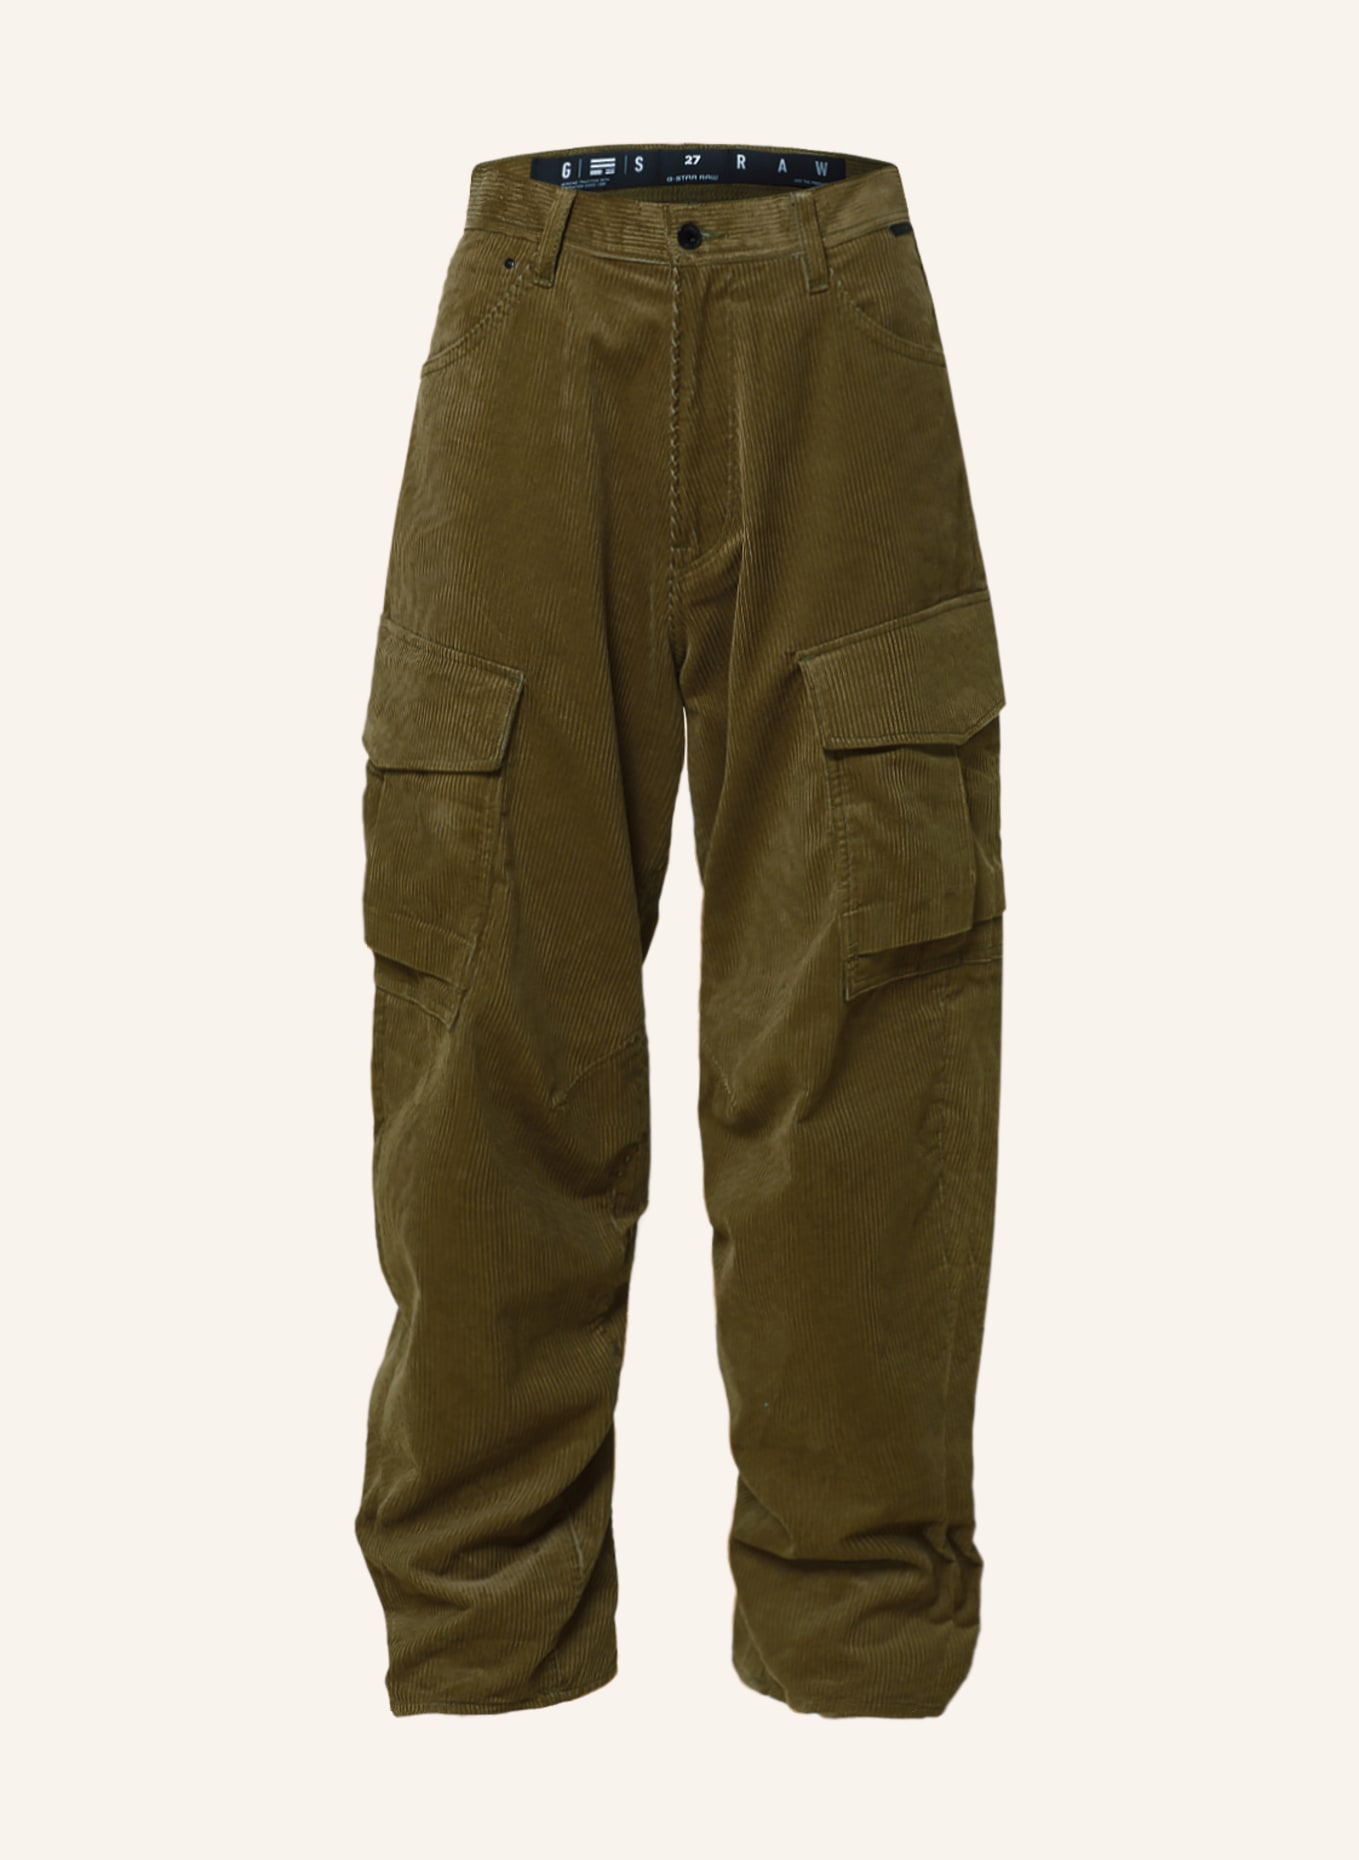 Buy Grey Trousers & Pants for Men by G STAR RAW Online, g star - coworq.co